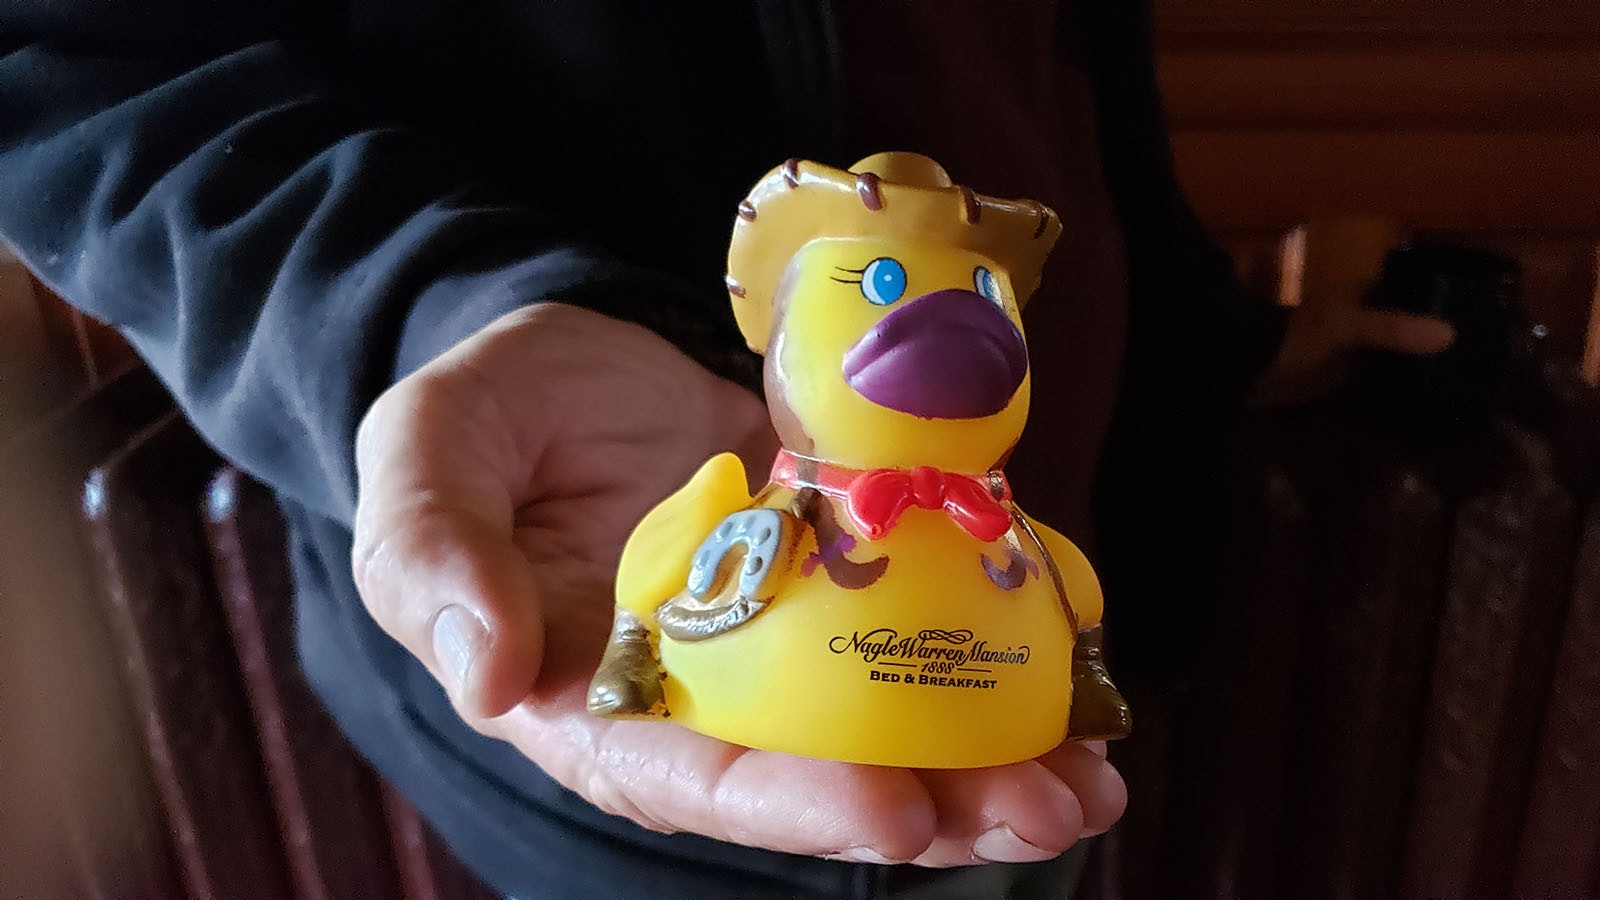 These little rubber duckies are a popular memento from the Nagle-Warren Mansion.